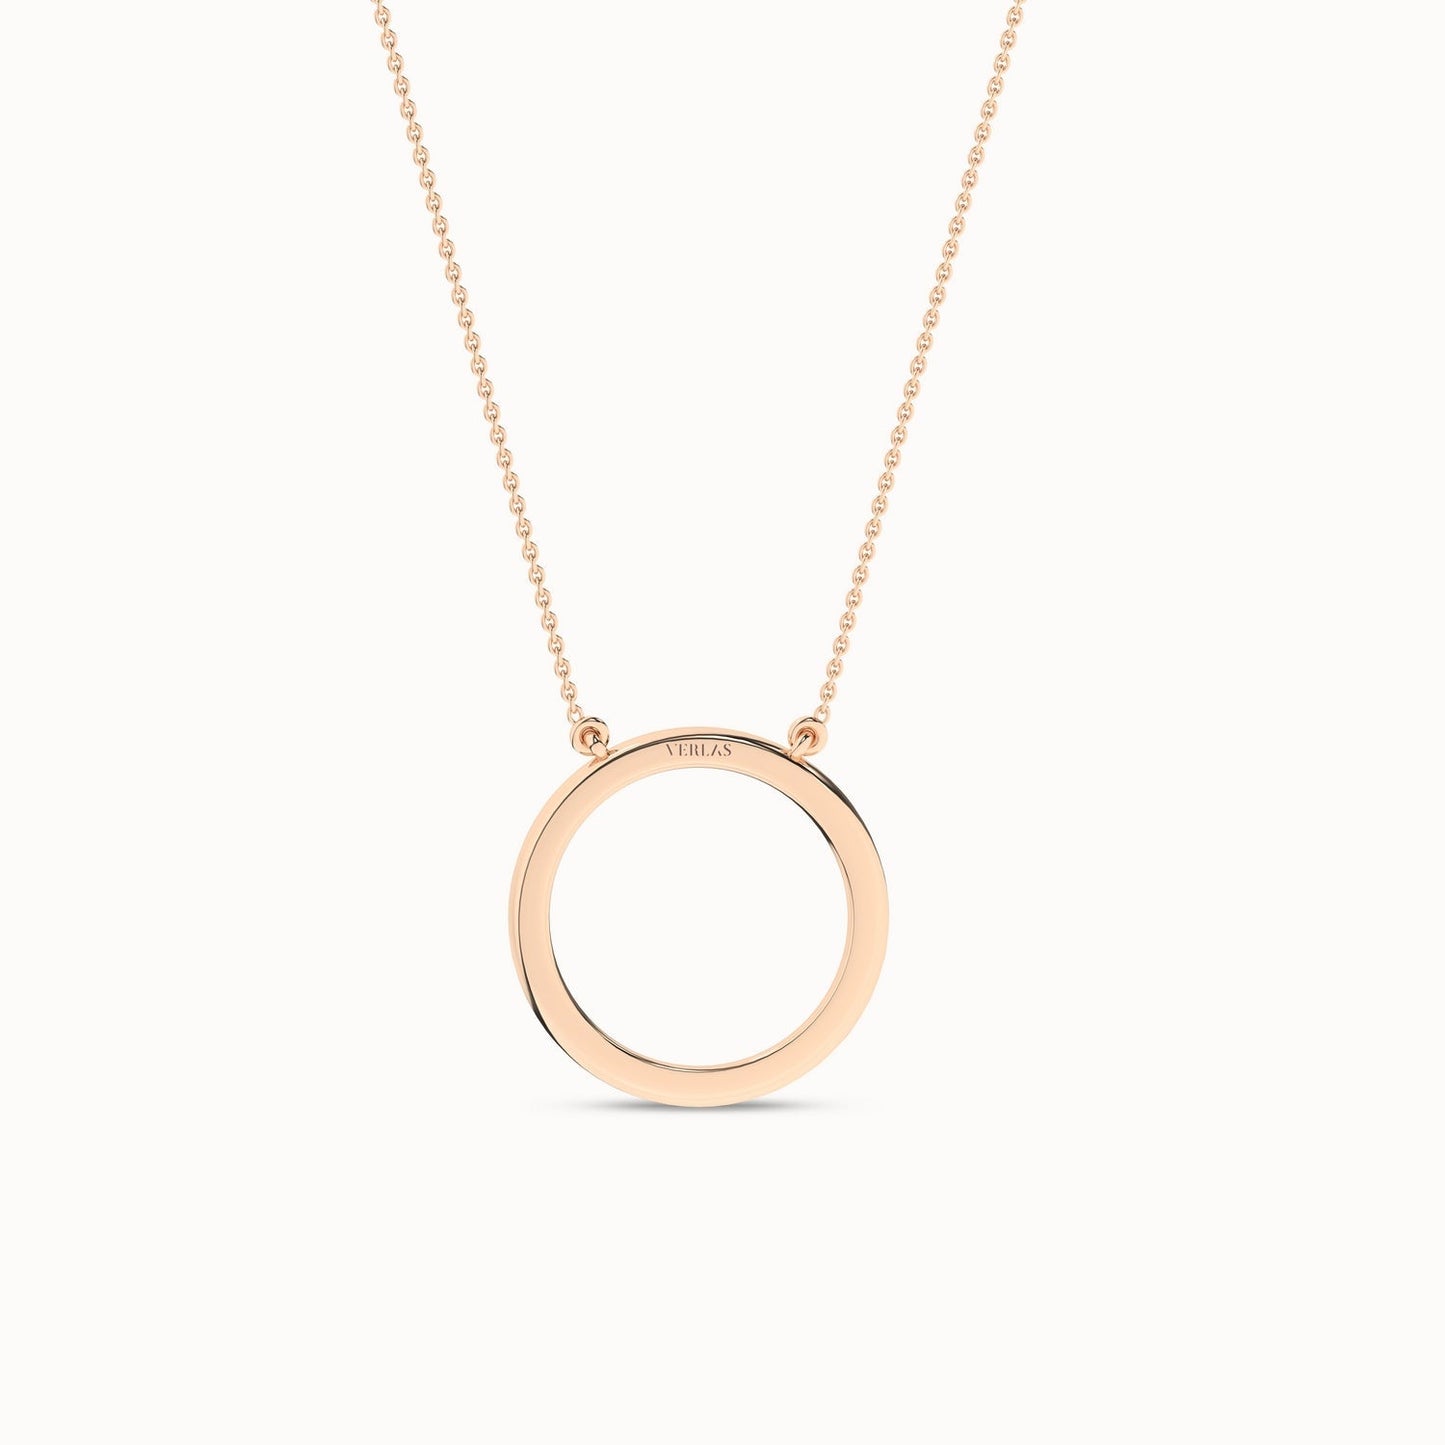 Circular Silhouette Necklace_Product Angle_1/2Ct. - 3